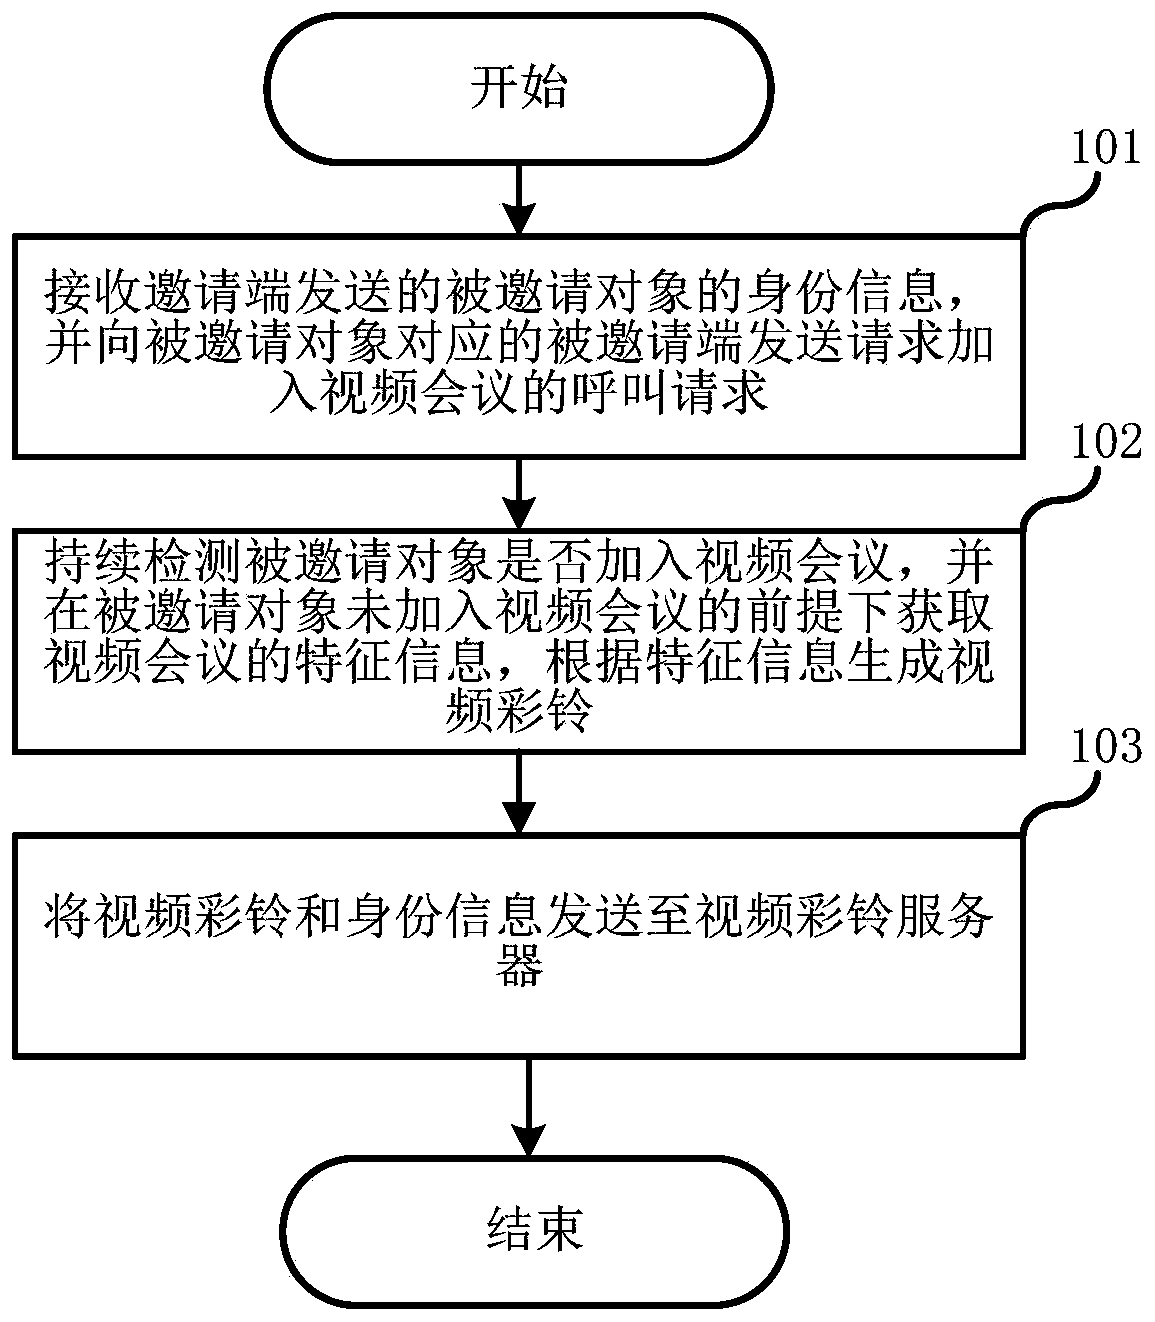 Video conference control method and system, server and readable storage medium